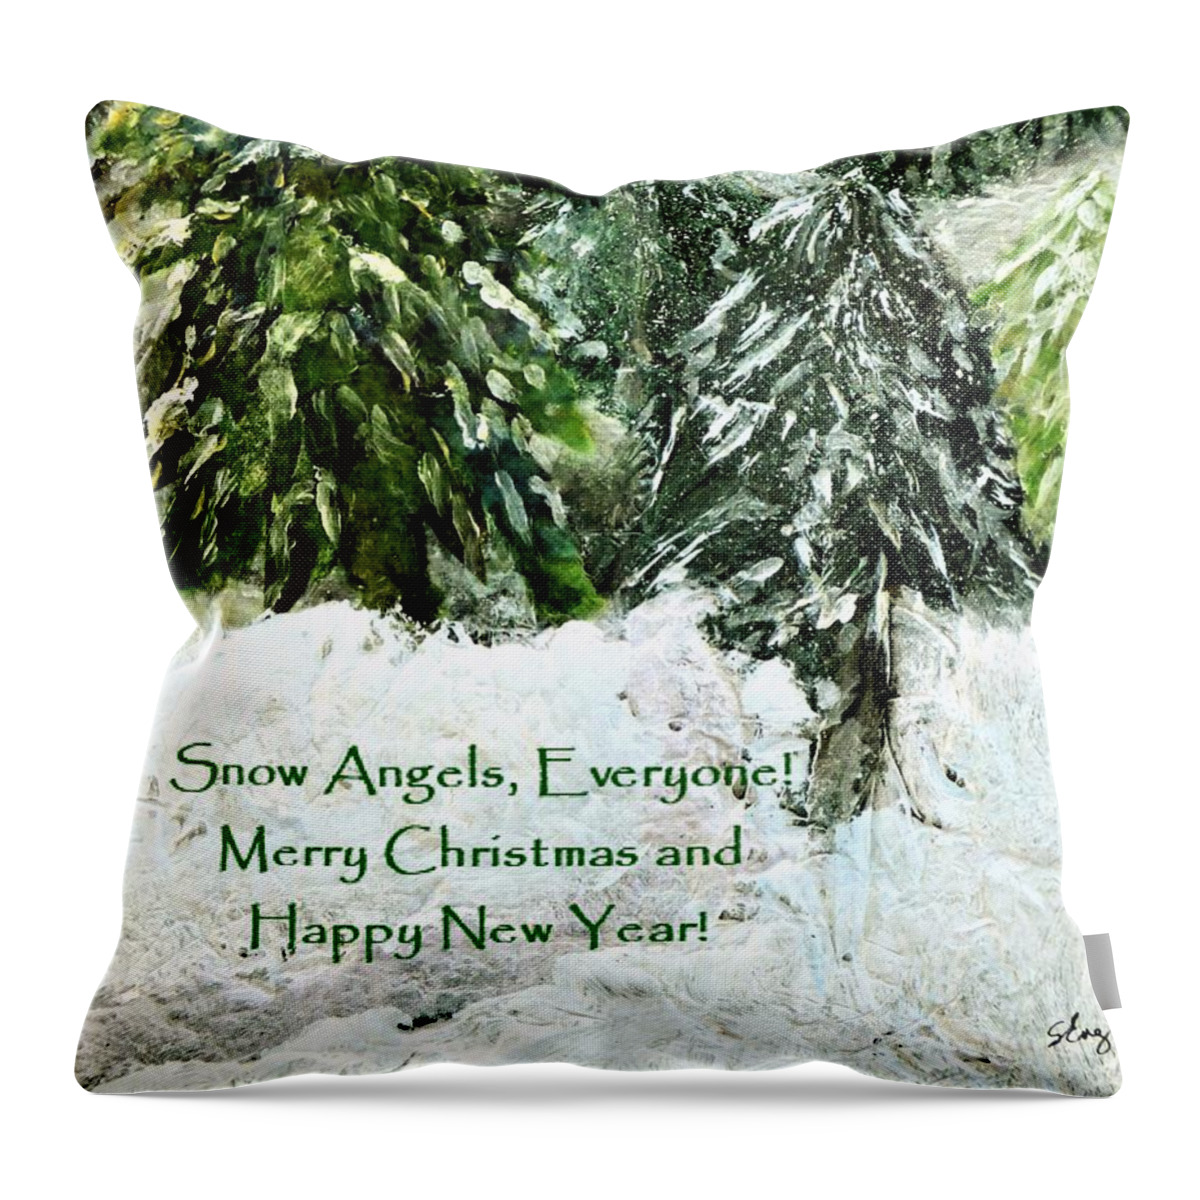 Christmas Throw Pillow featuring the mixed media Snow Angels Everyone by Sharon Williams Eng